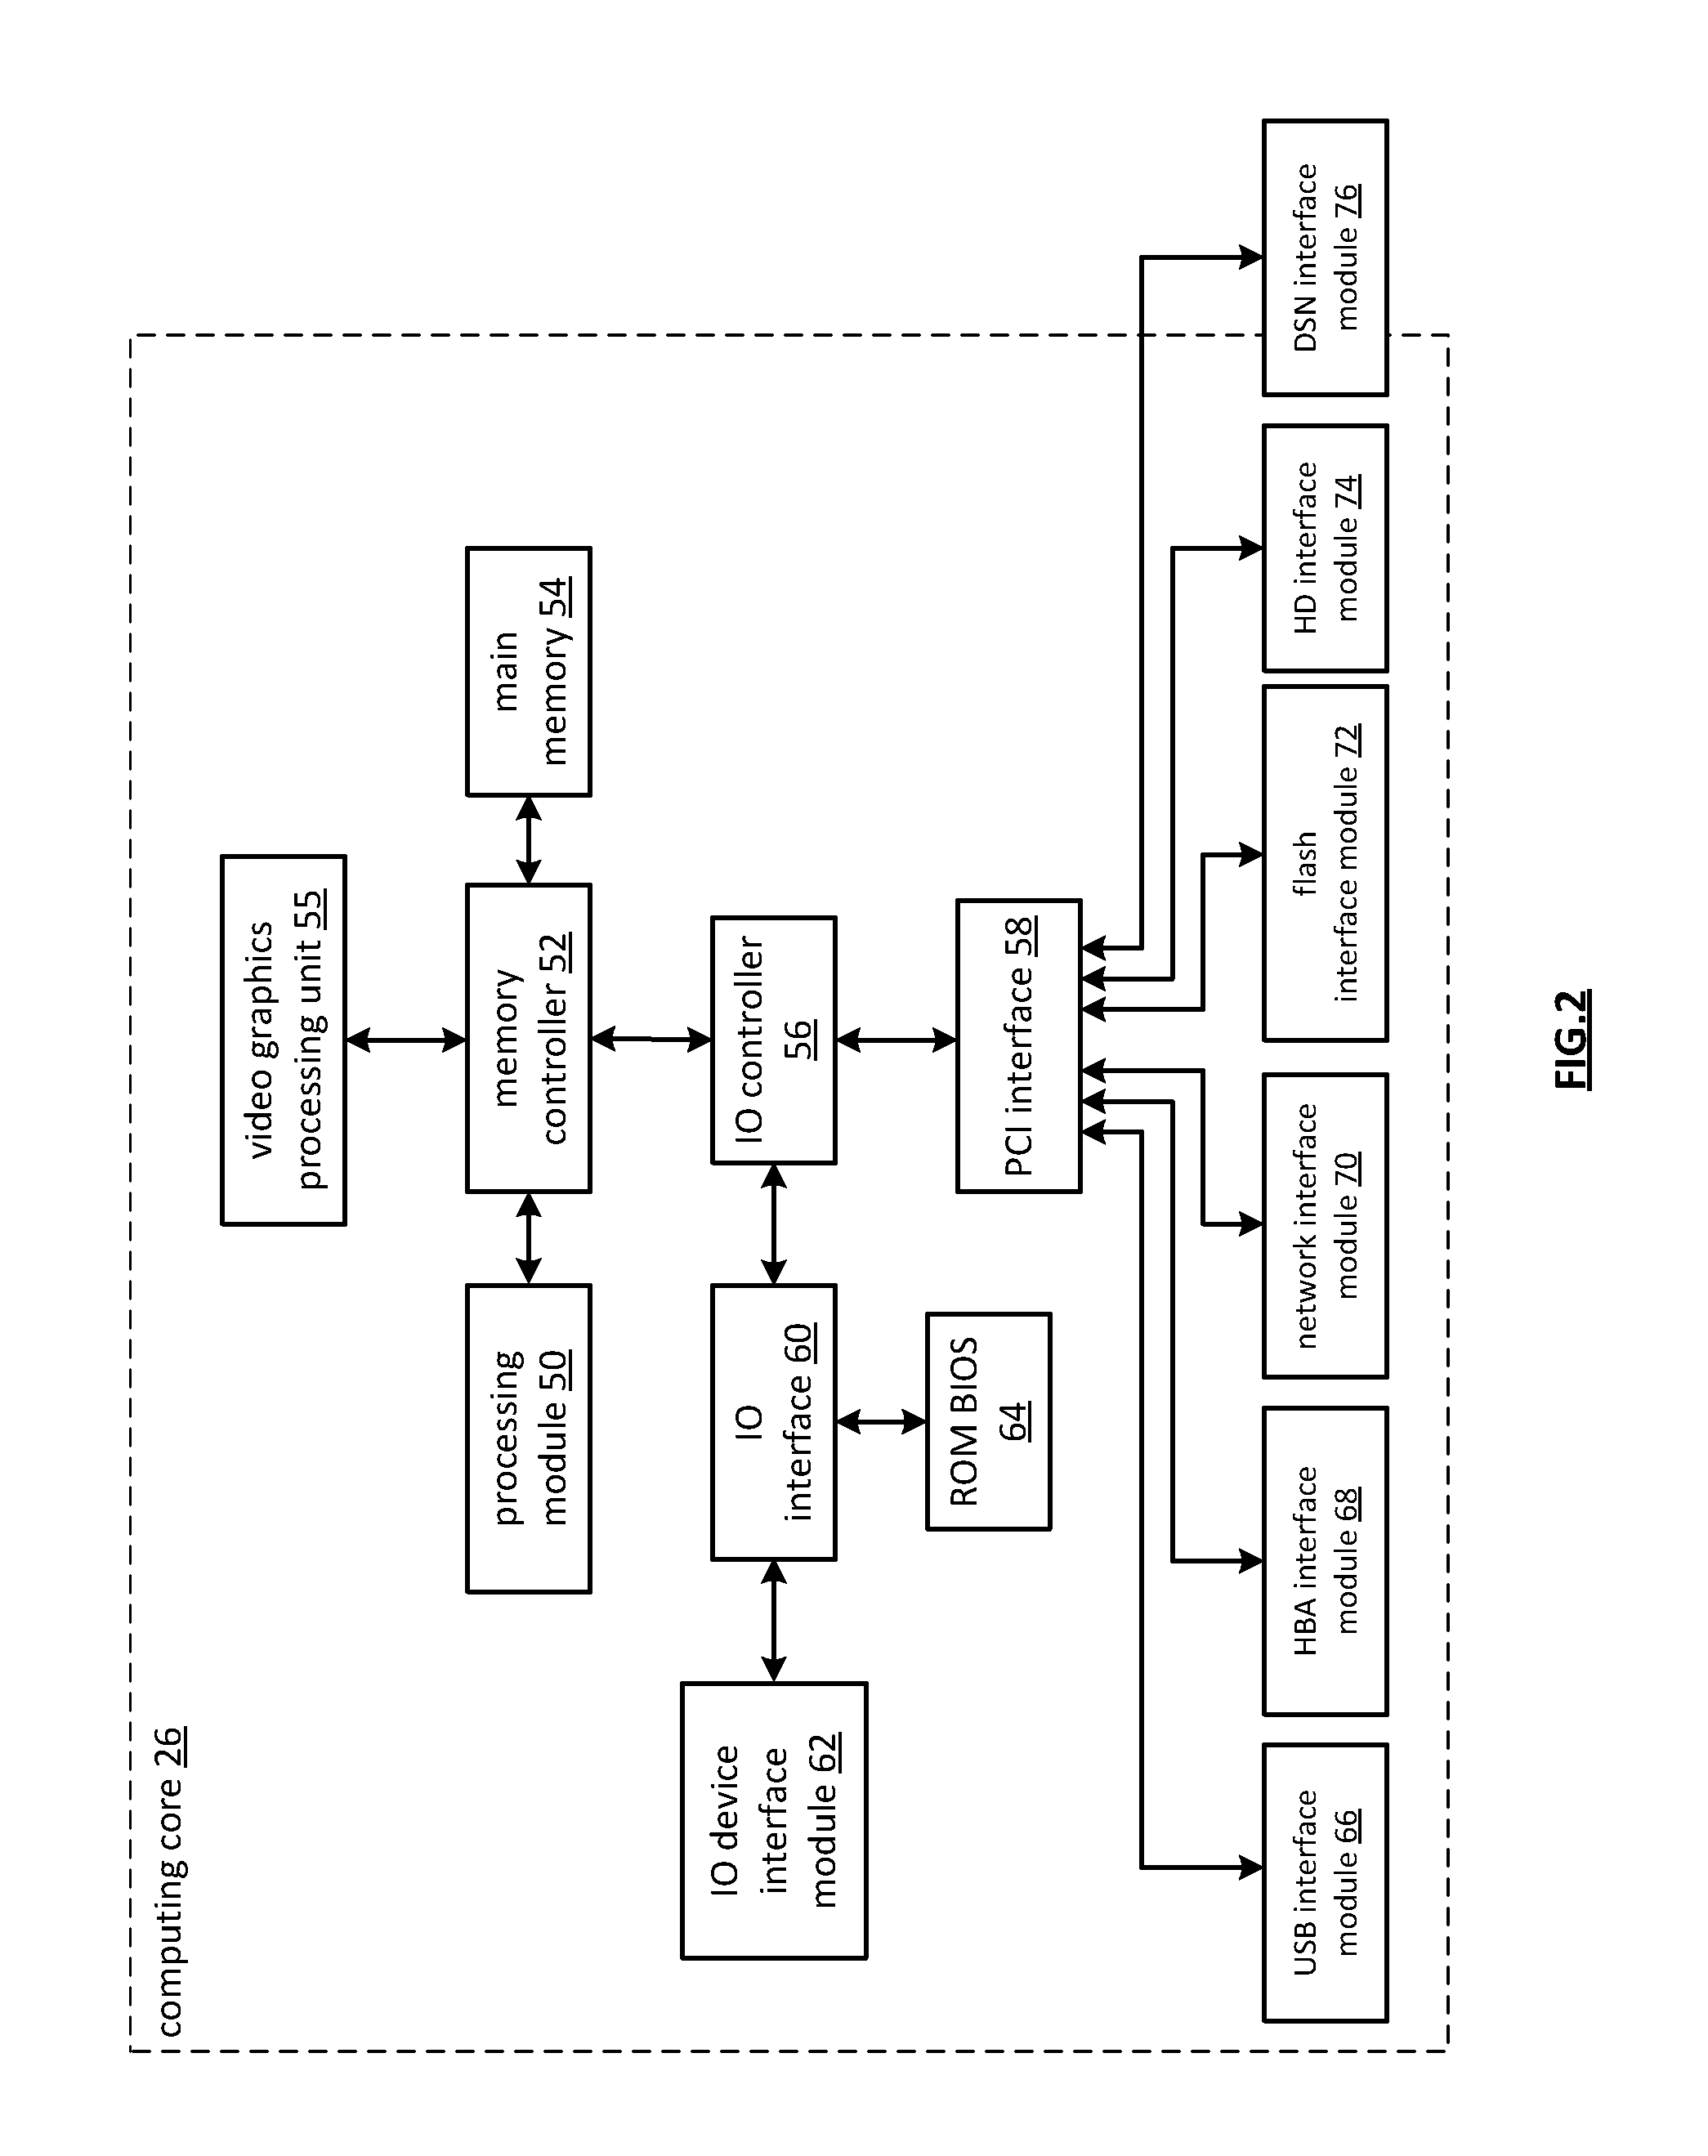 Method and apparatus for storage integrity processing based on error types in a dispersed storage network